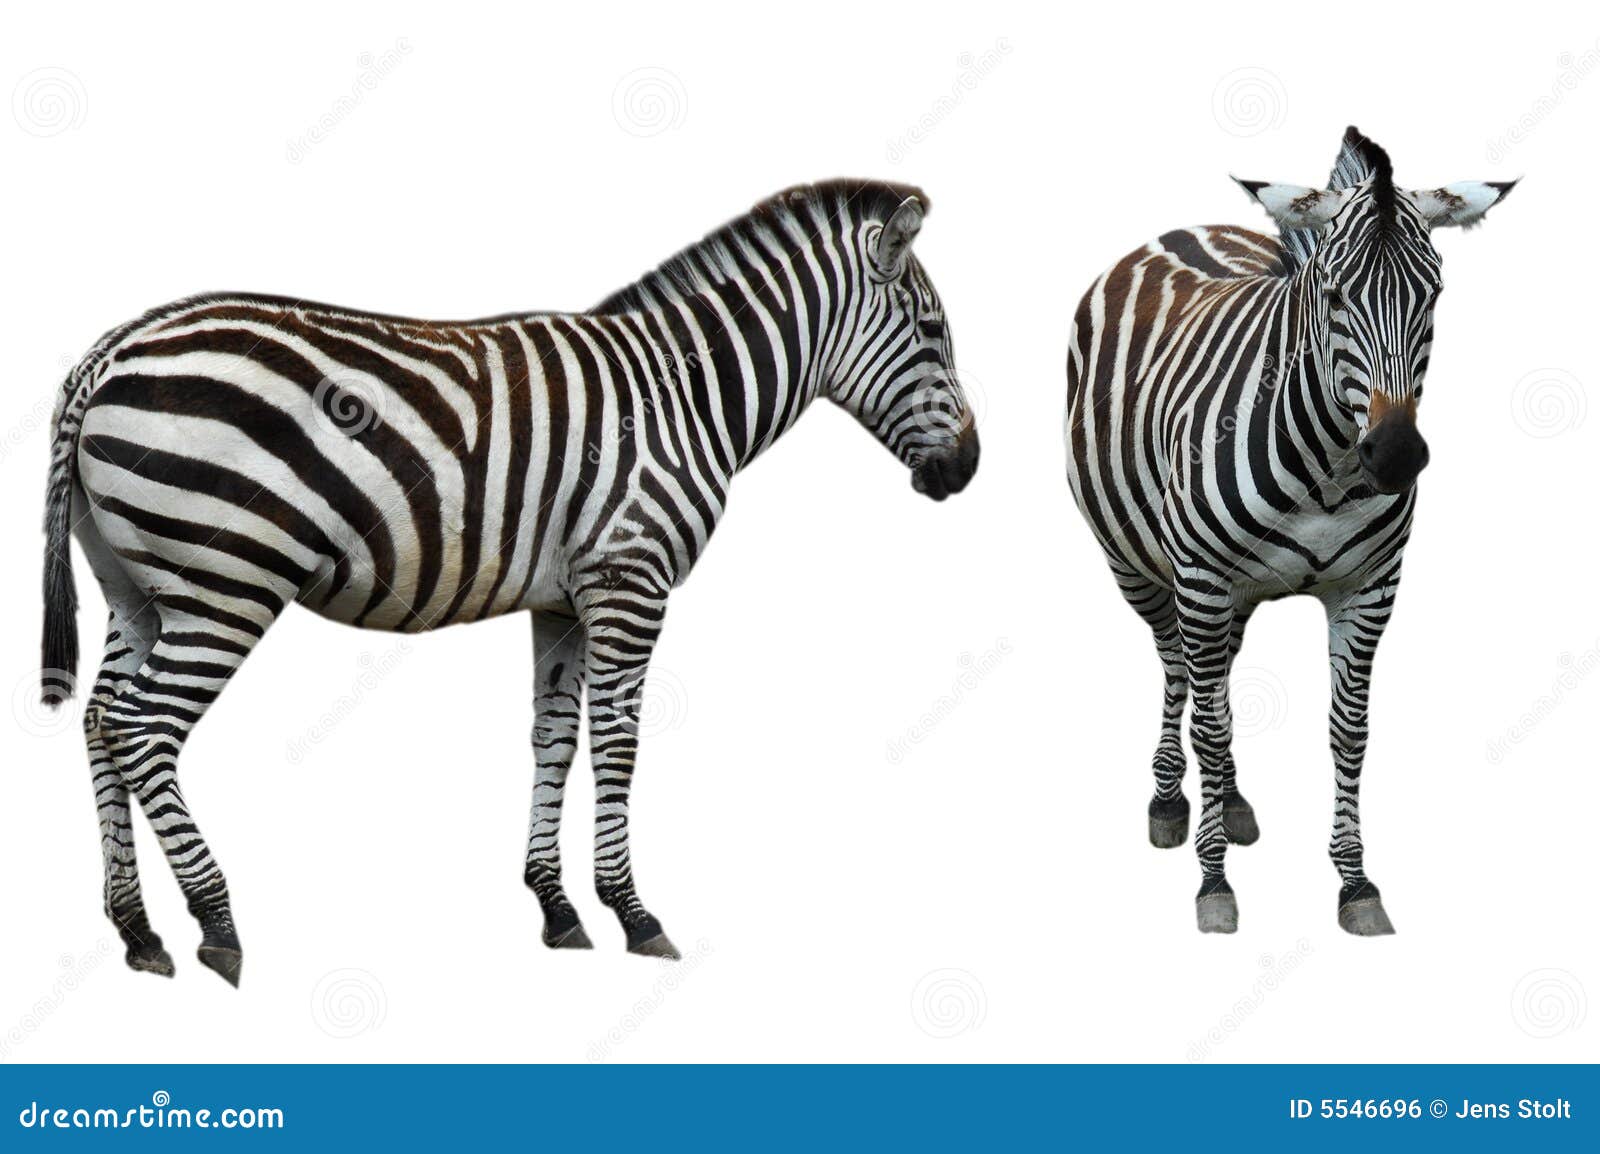 2 different zebras isolated on white